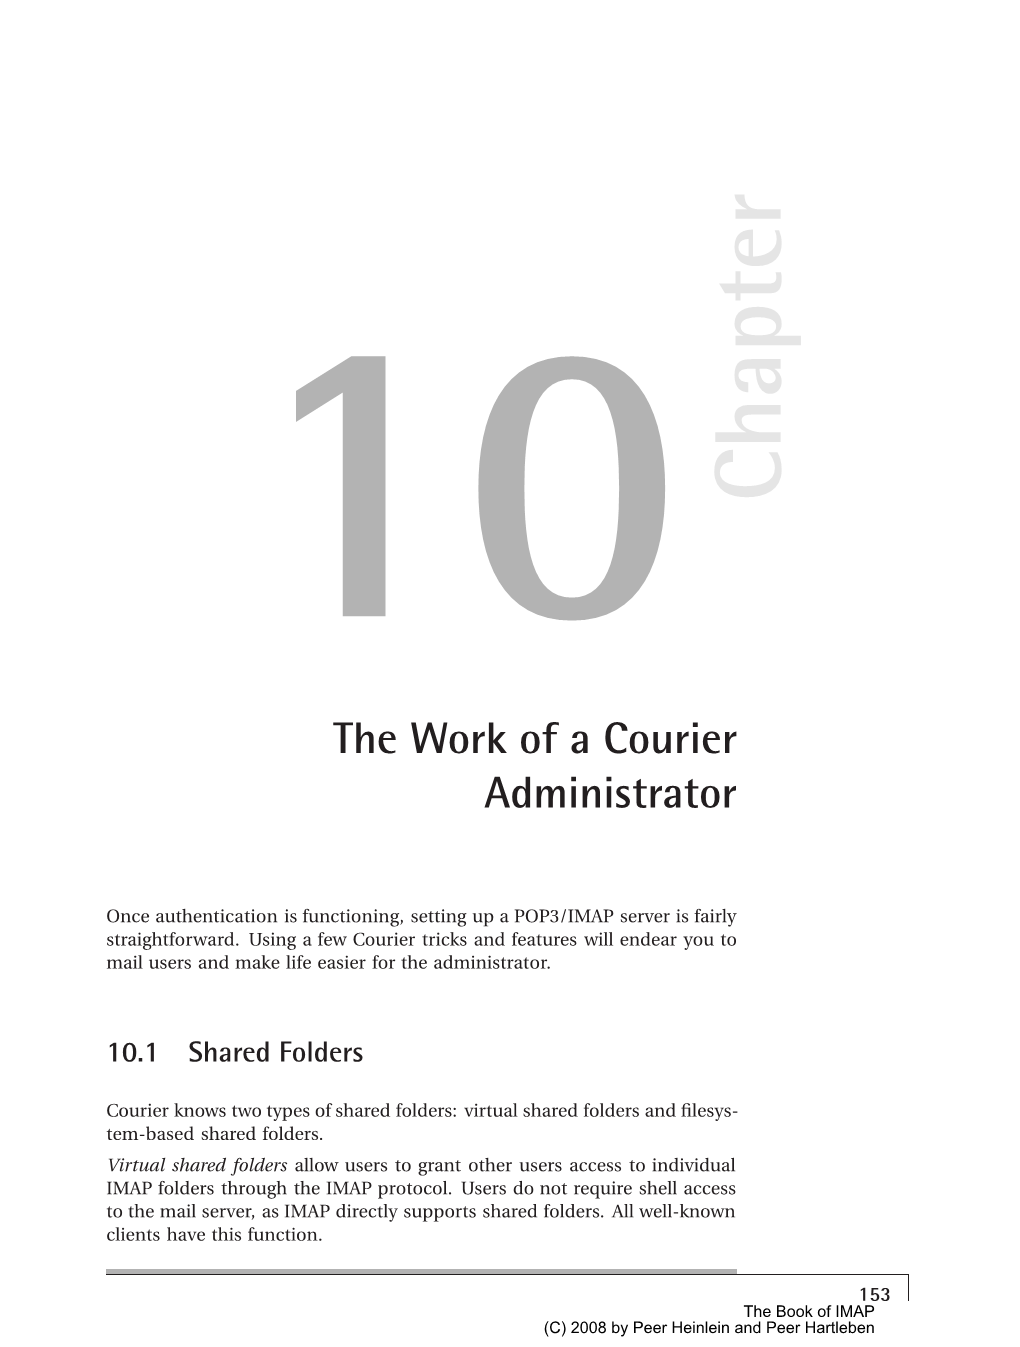 Download Chapter 10: the Work of a Courier Administrator